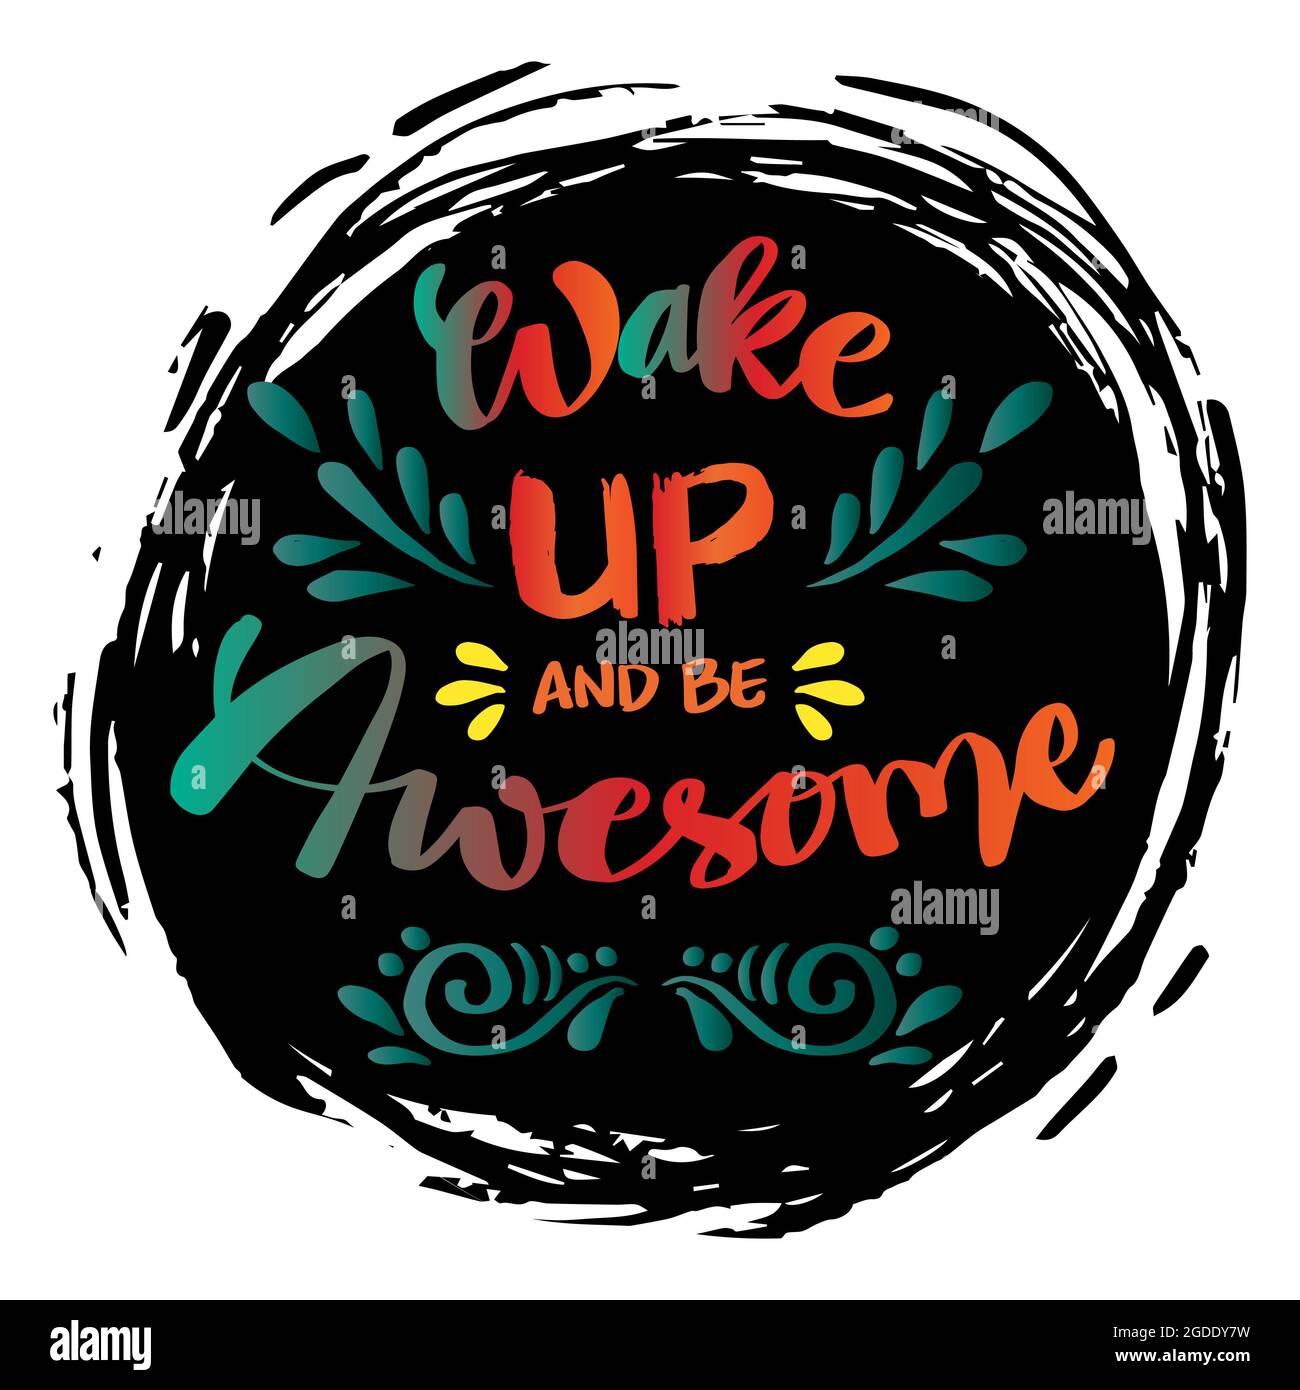 Wake up and be awesome hand lettering. Motivational quote. Stock Photo